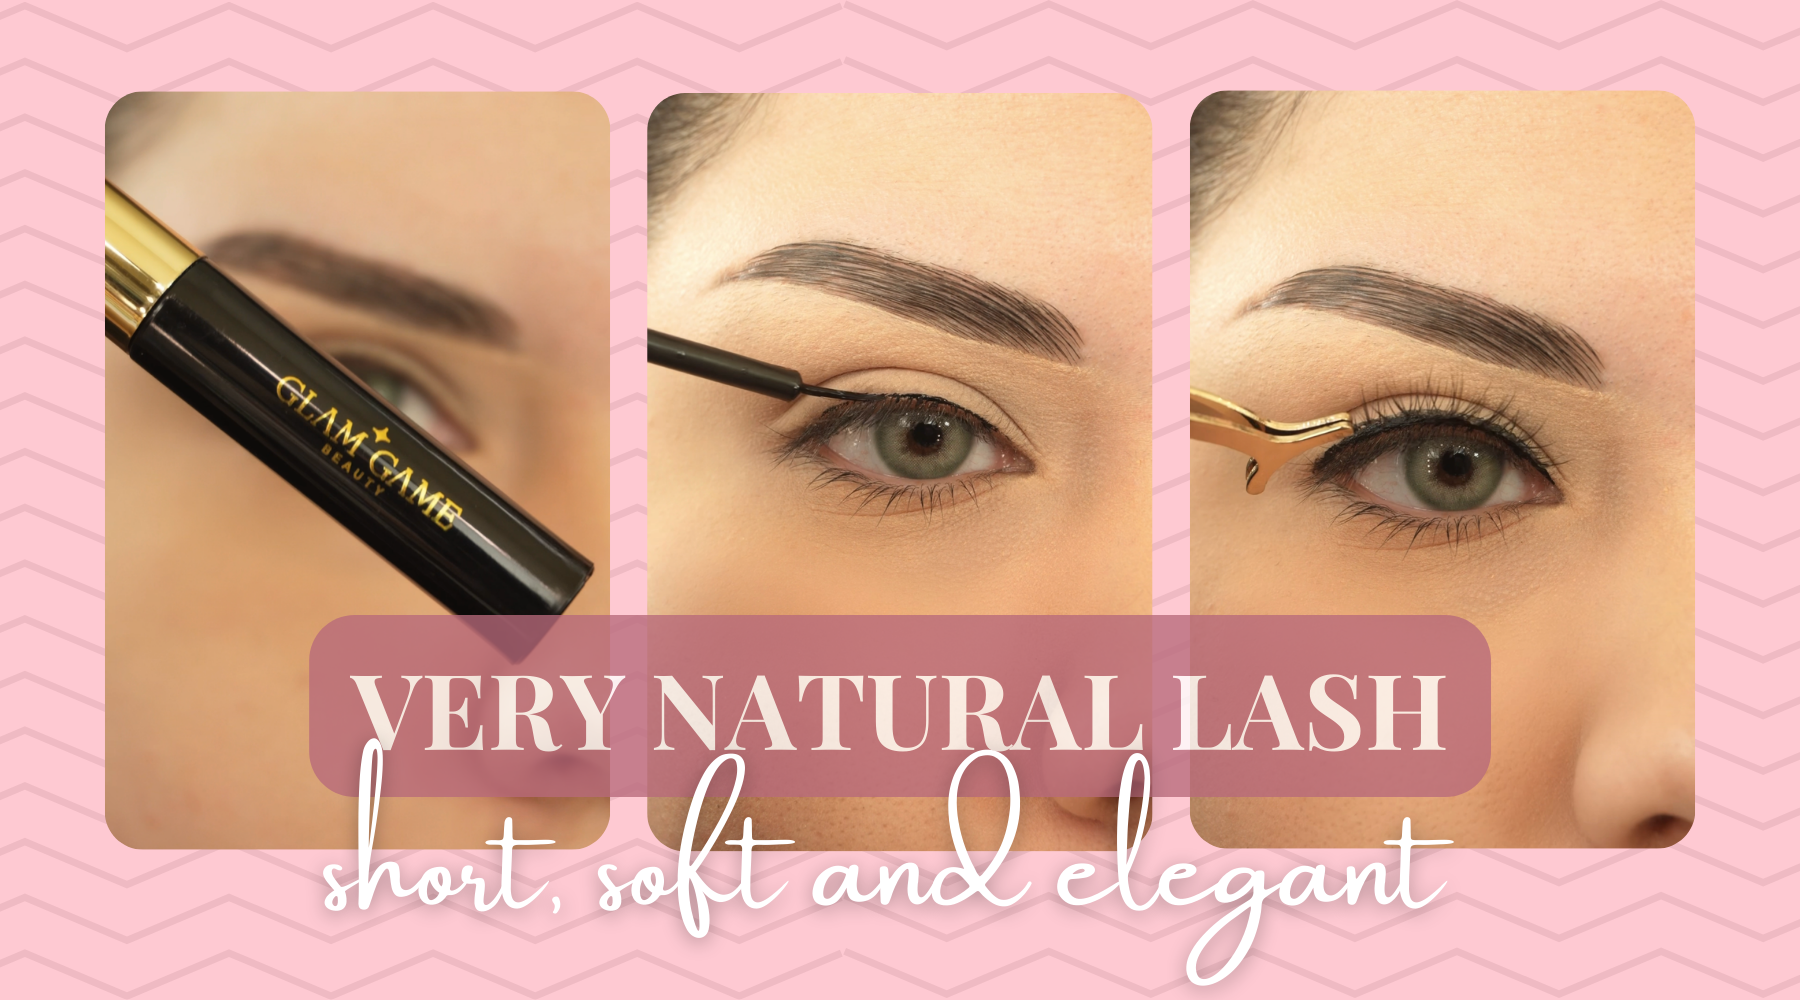 Discover a New Natural Look with the Very Natural Lash Deluxe Kit